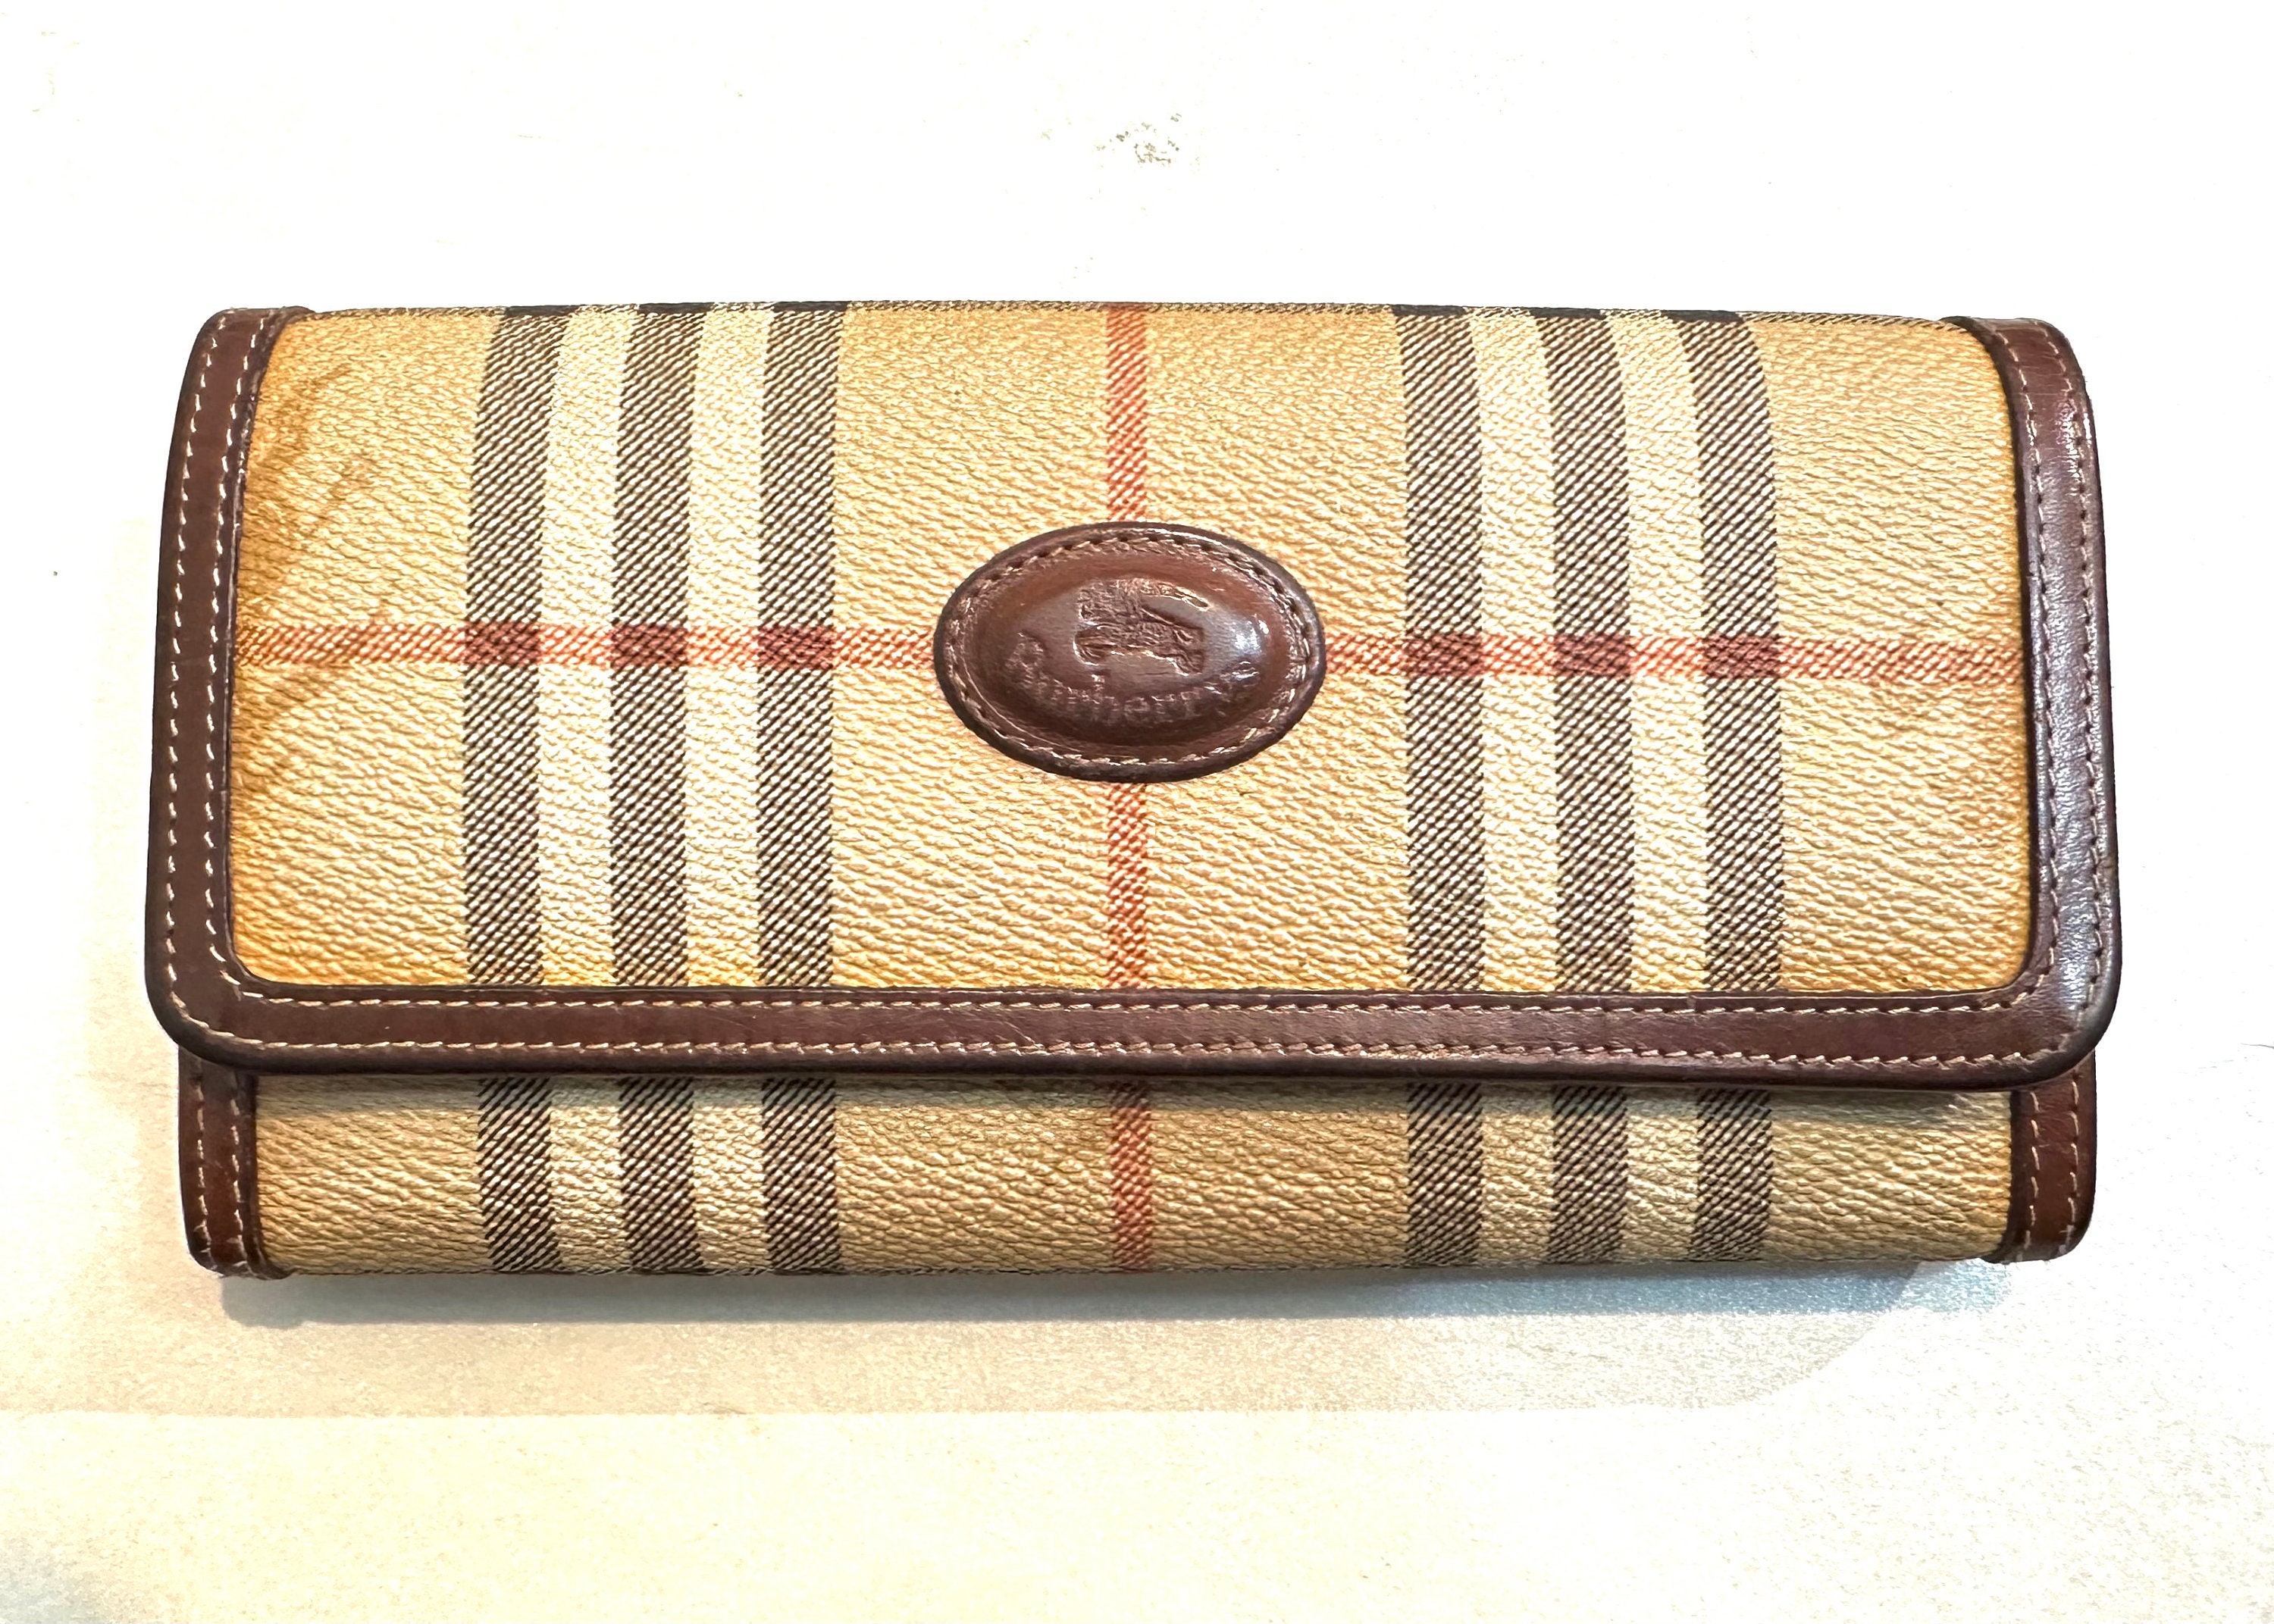 Vintage Burberry long wallet Patent And Check